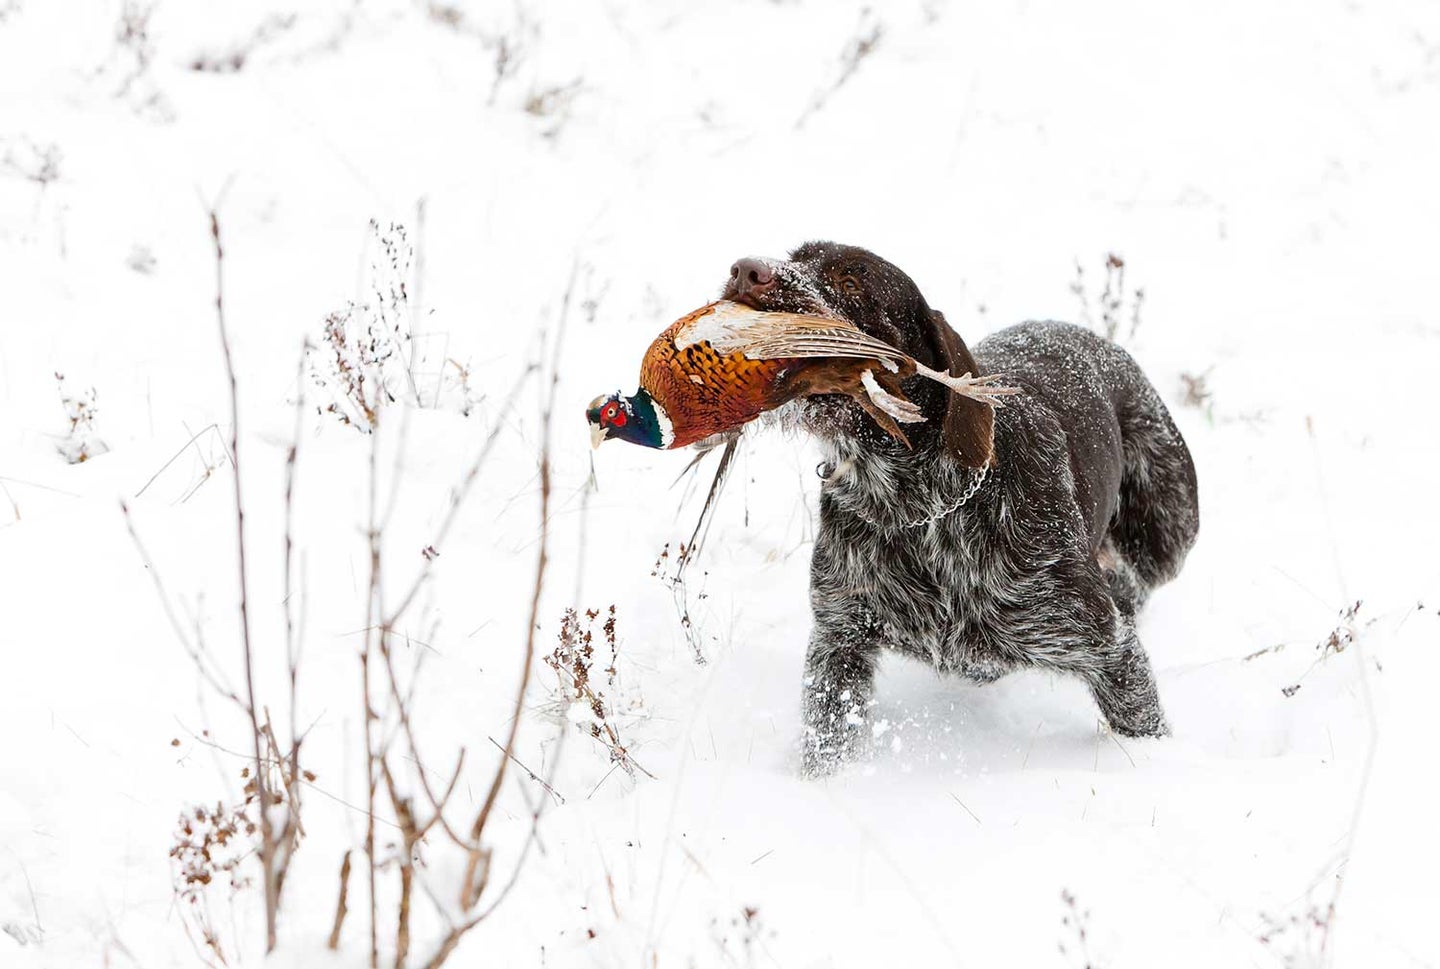 Hunting dog retrieving a late-season pheasant in the snow.